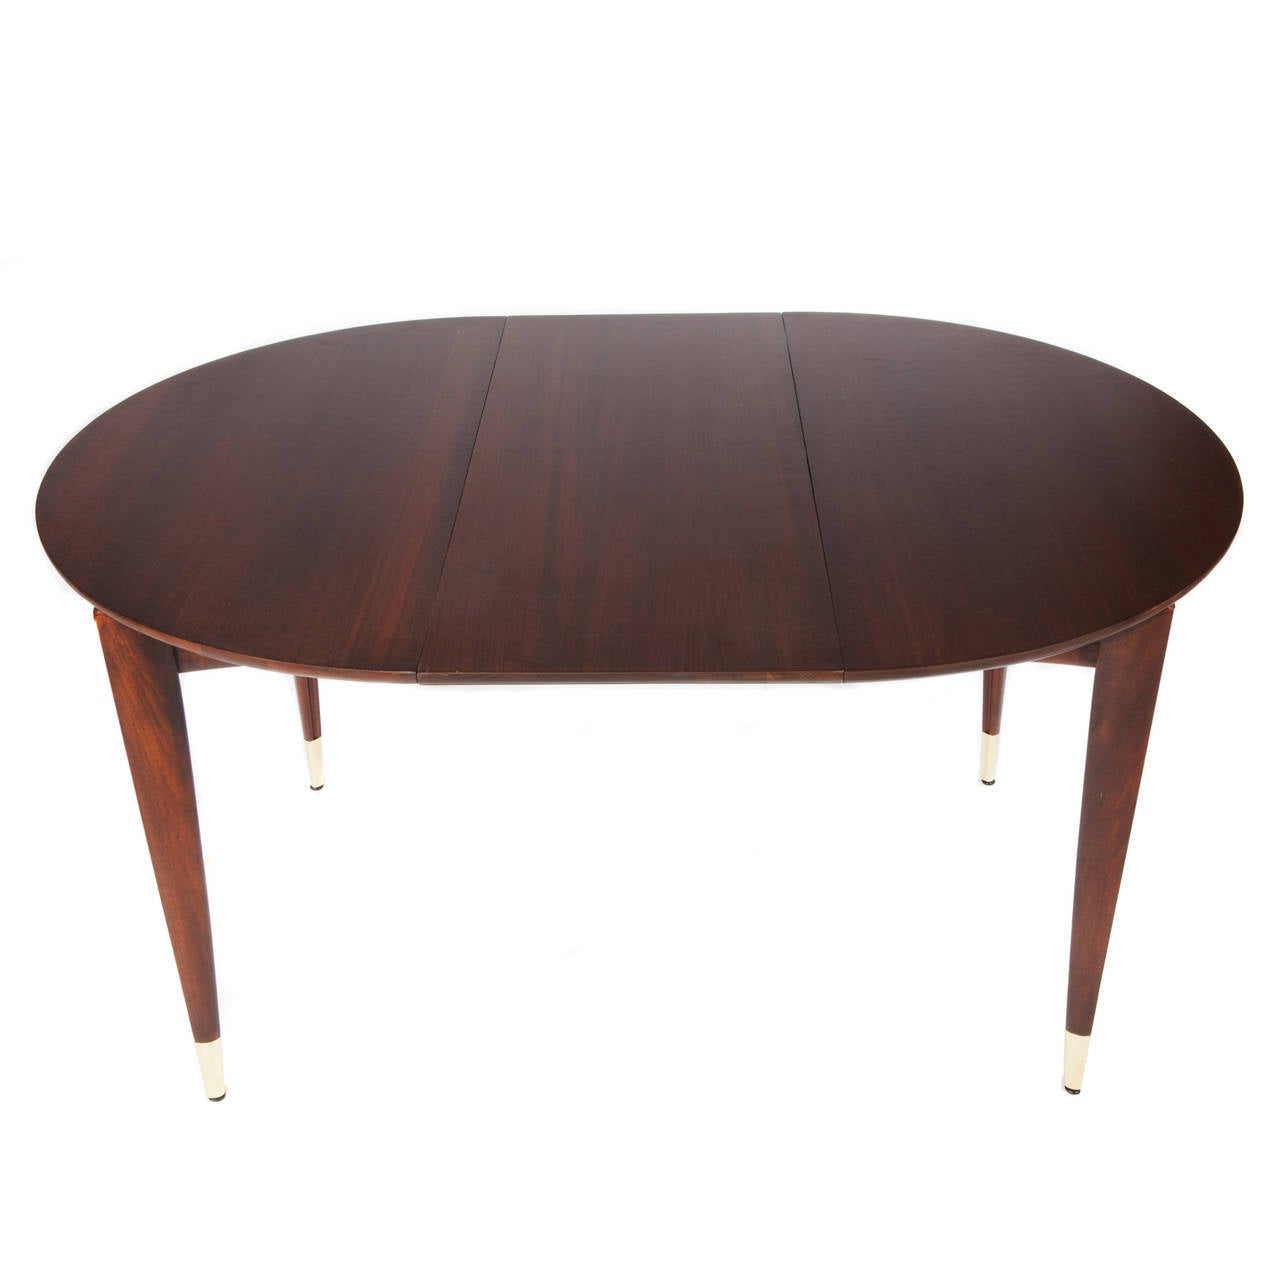 American Walnut Extension Dining Table by Gio Ponti